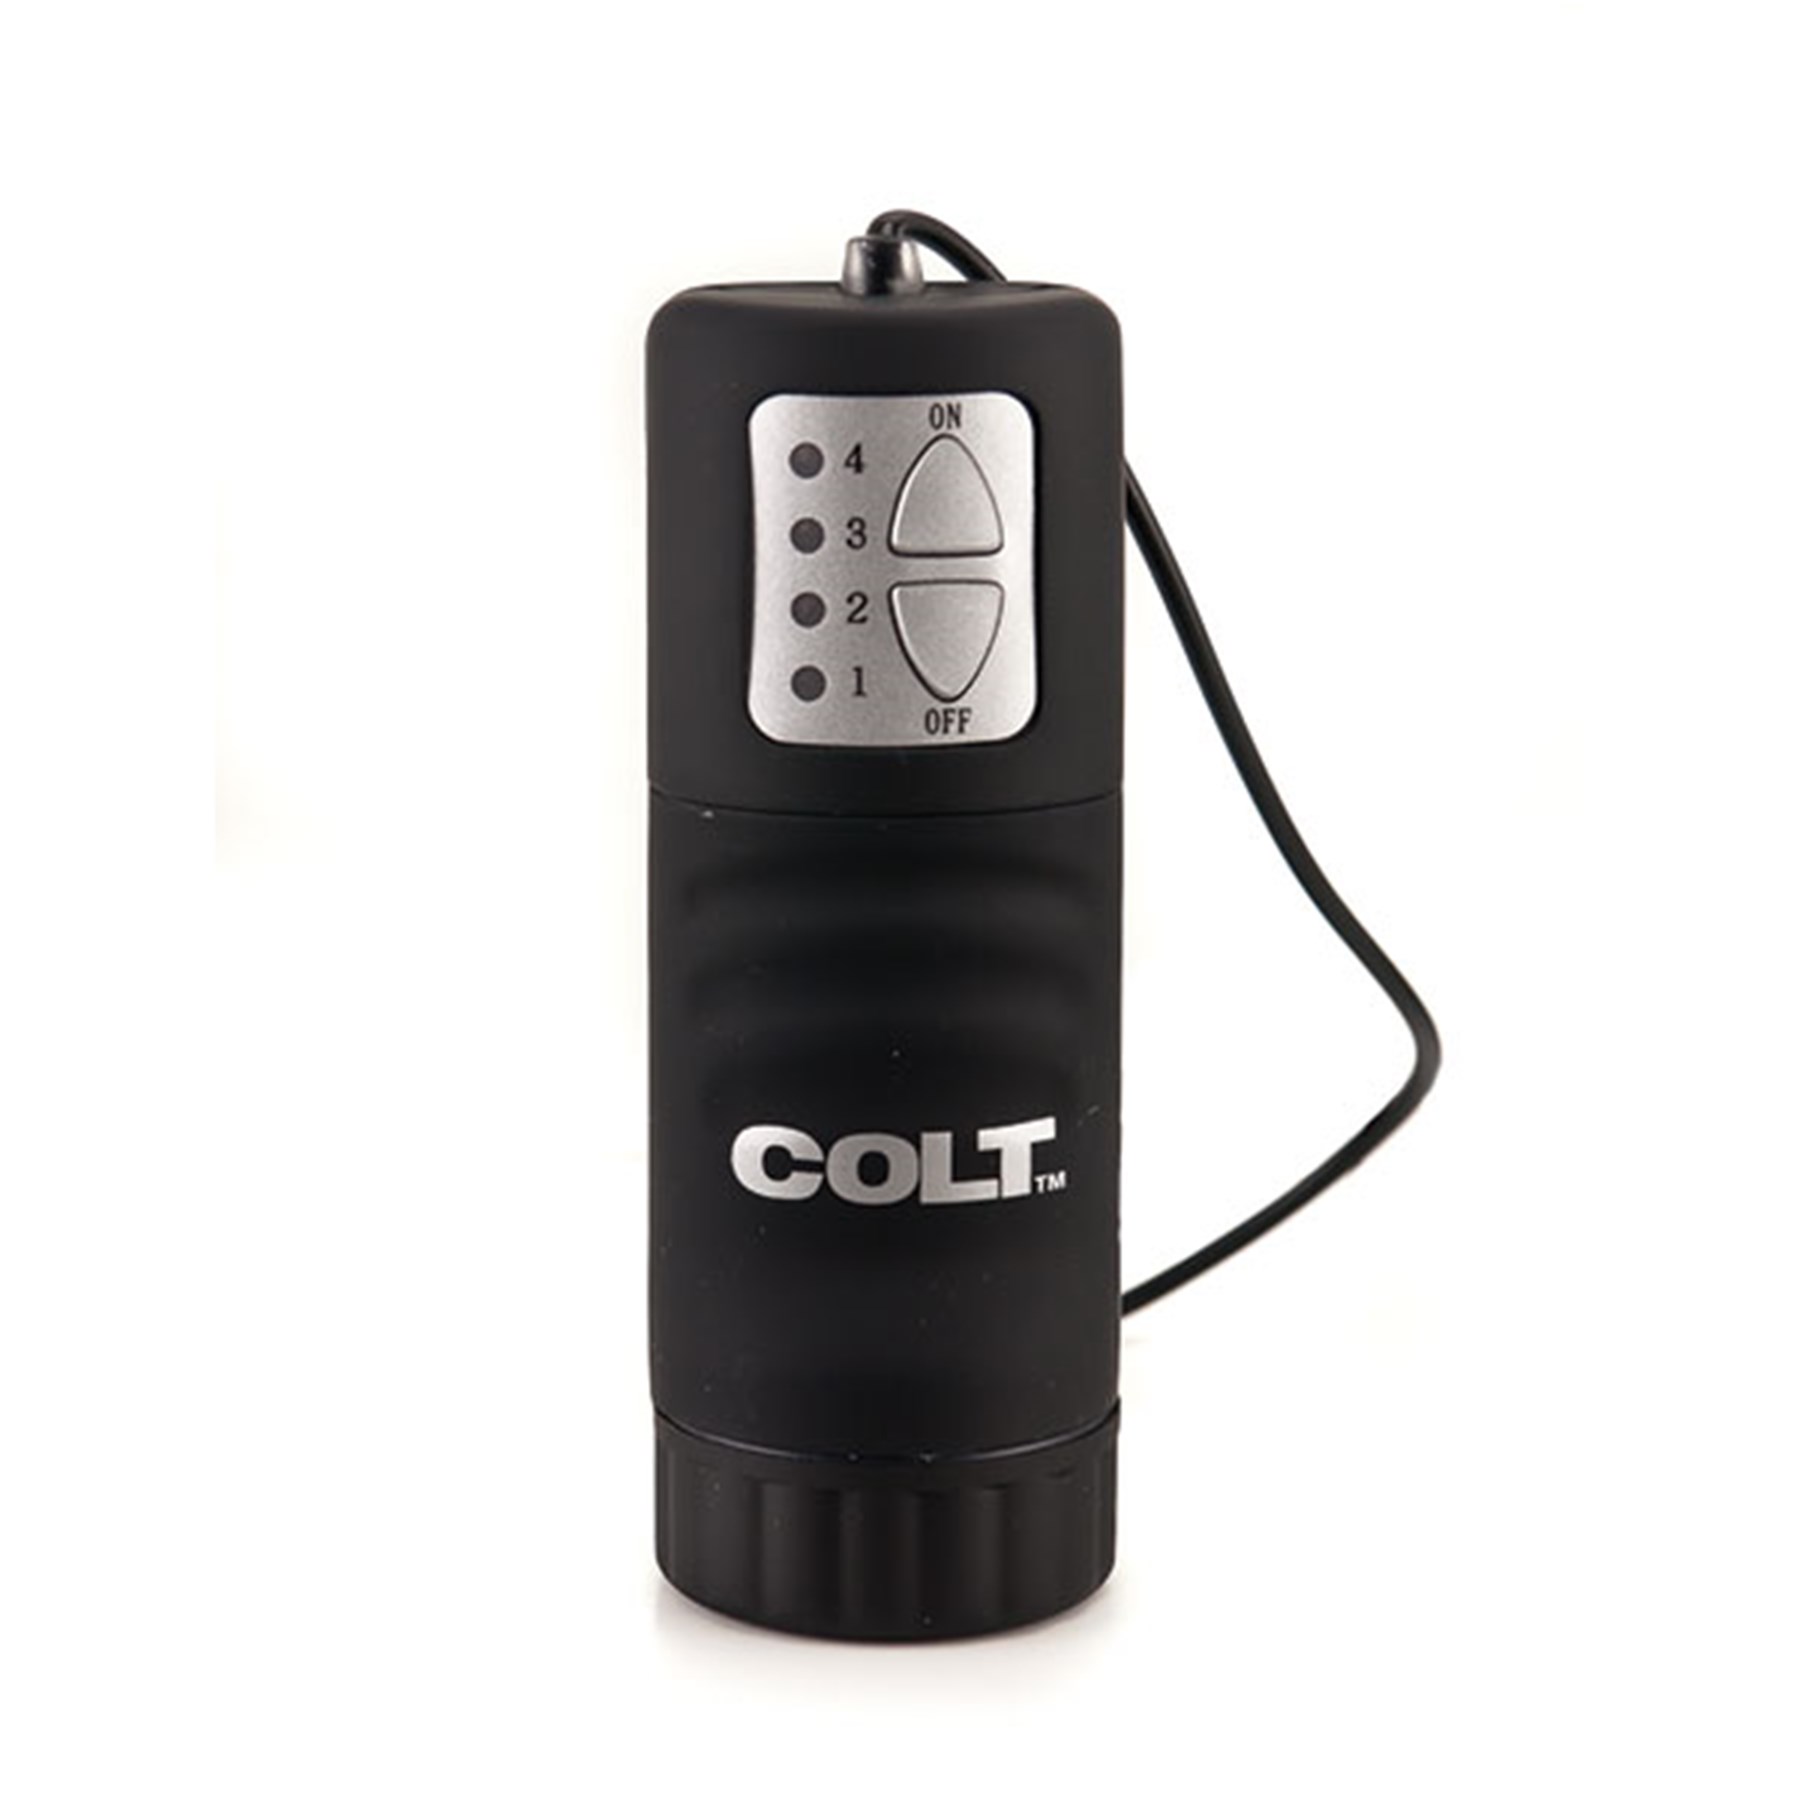 Colt Waterproof Anal T controller